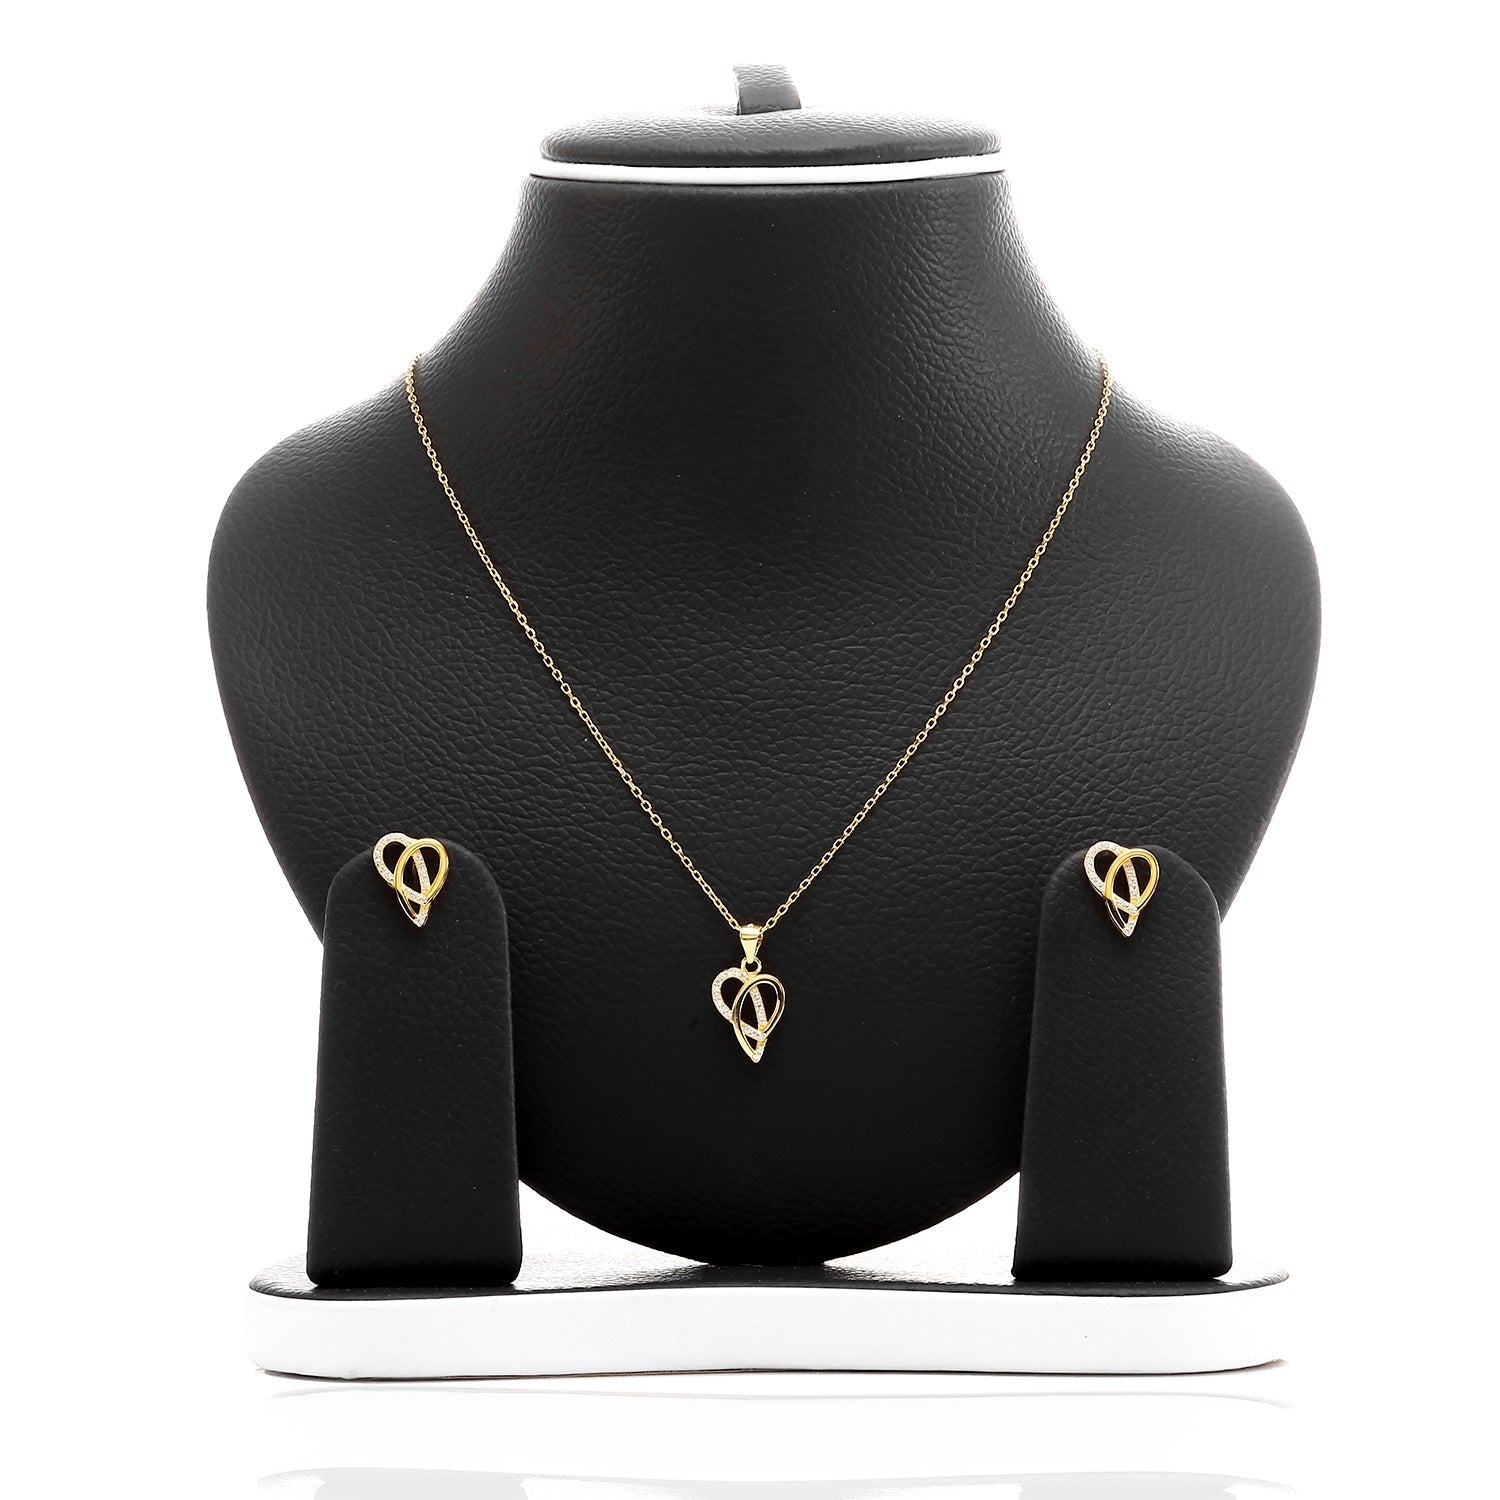 Ribbons of Love Pendant Necklace and Earrings Set - ARJW1007GD ARCADIO